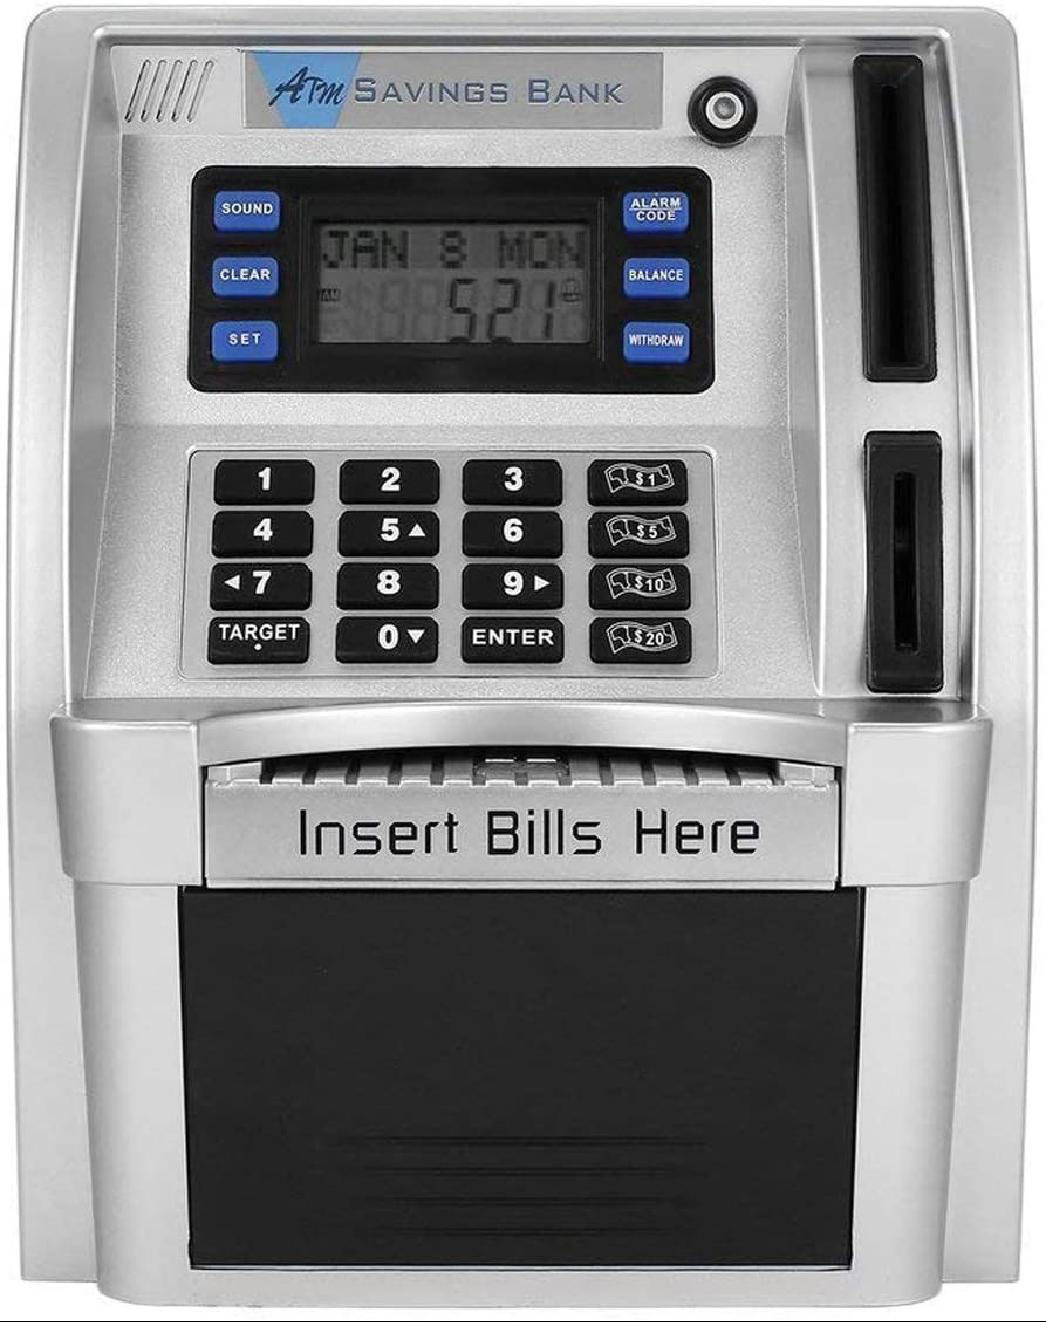 Digital Electronic Safe Box Coin Recognition Bill Feeder 2021 Upgraded-ATM Savings Piggy Bank Machine for Real Money for Kids with Debit Card Balance Calculator 